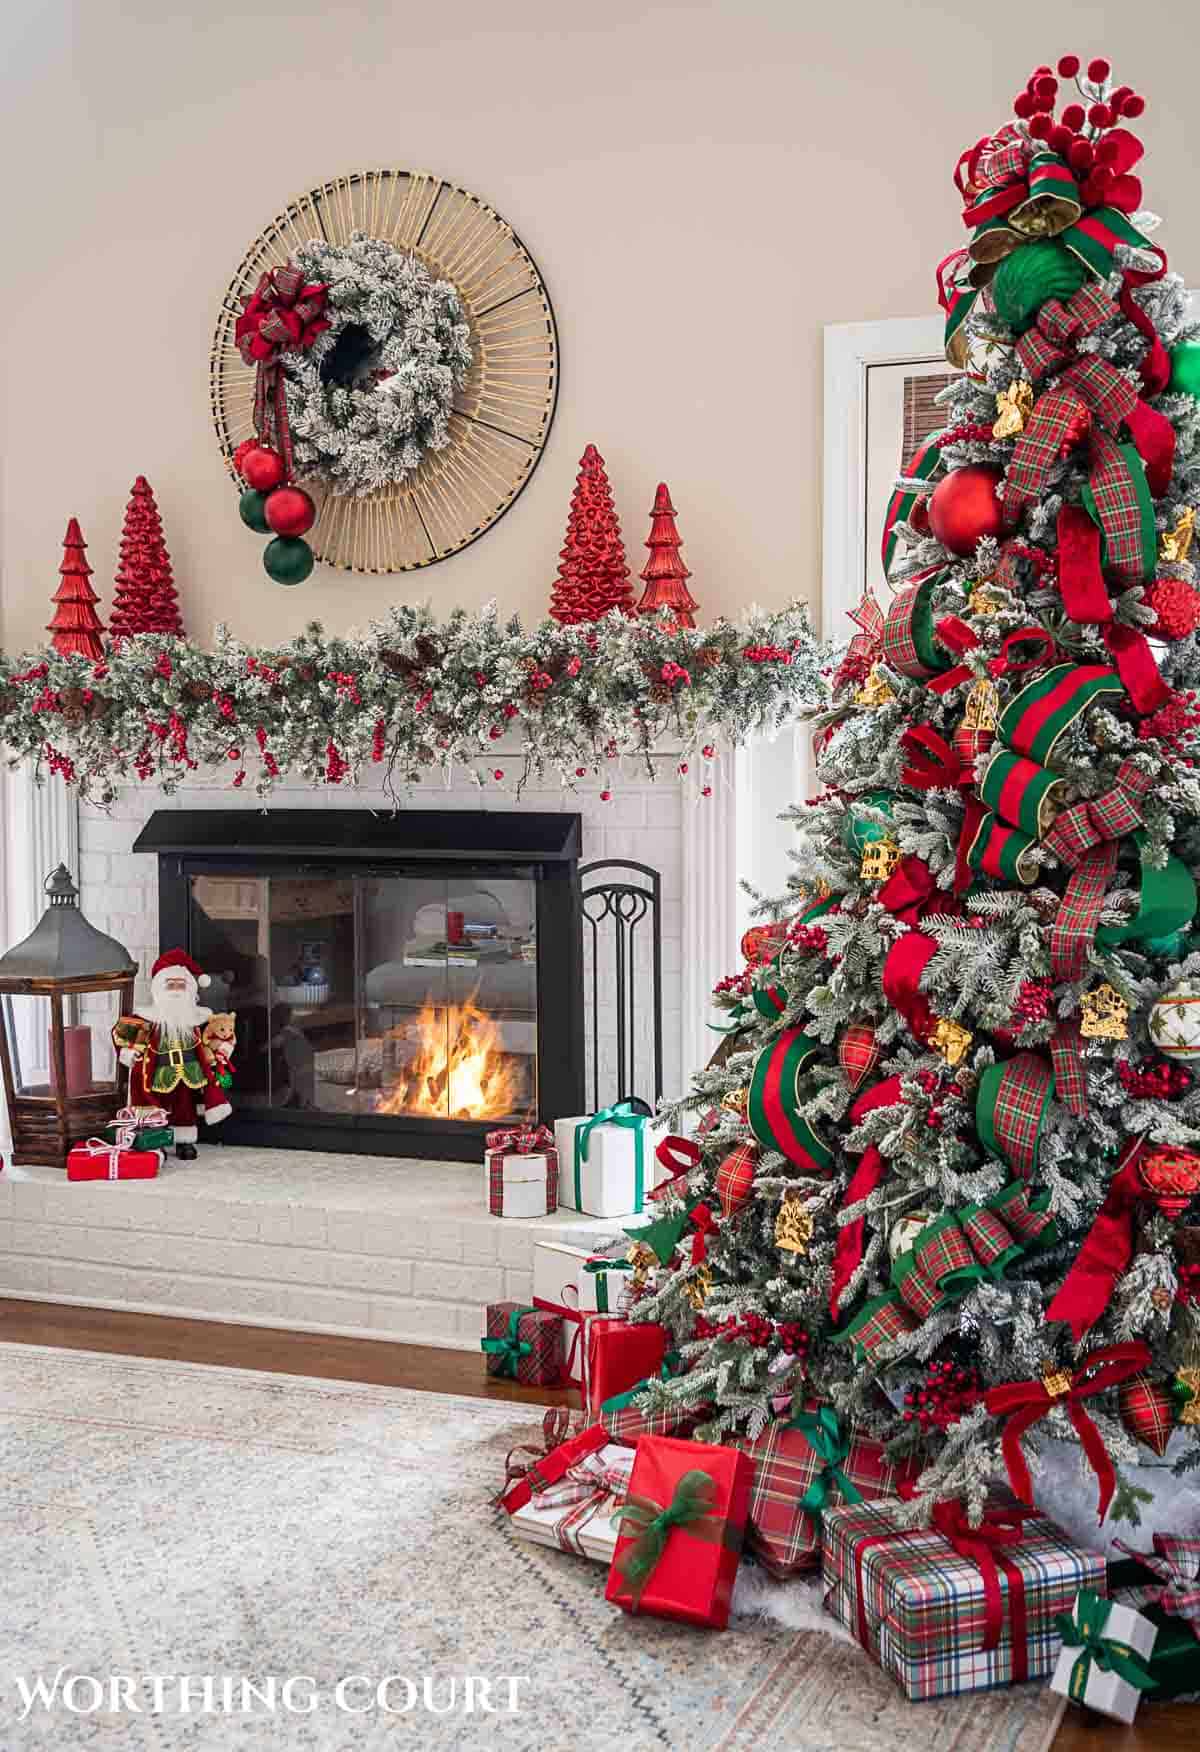 80 Christmas Tree Ideas That Prove It's the Most Wonderful Time of the Year